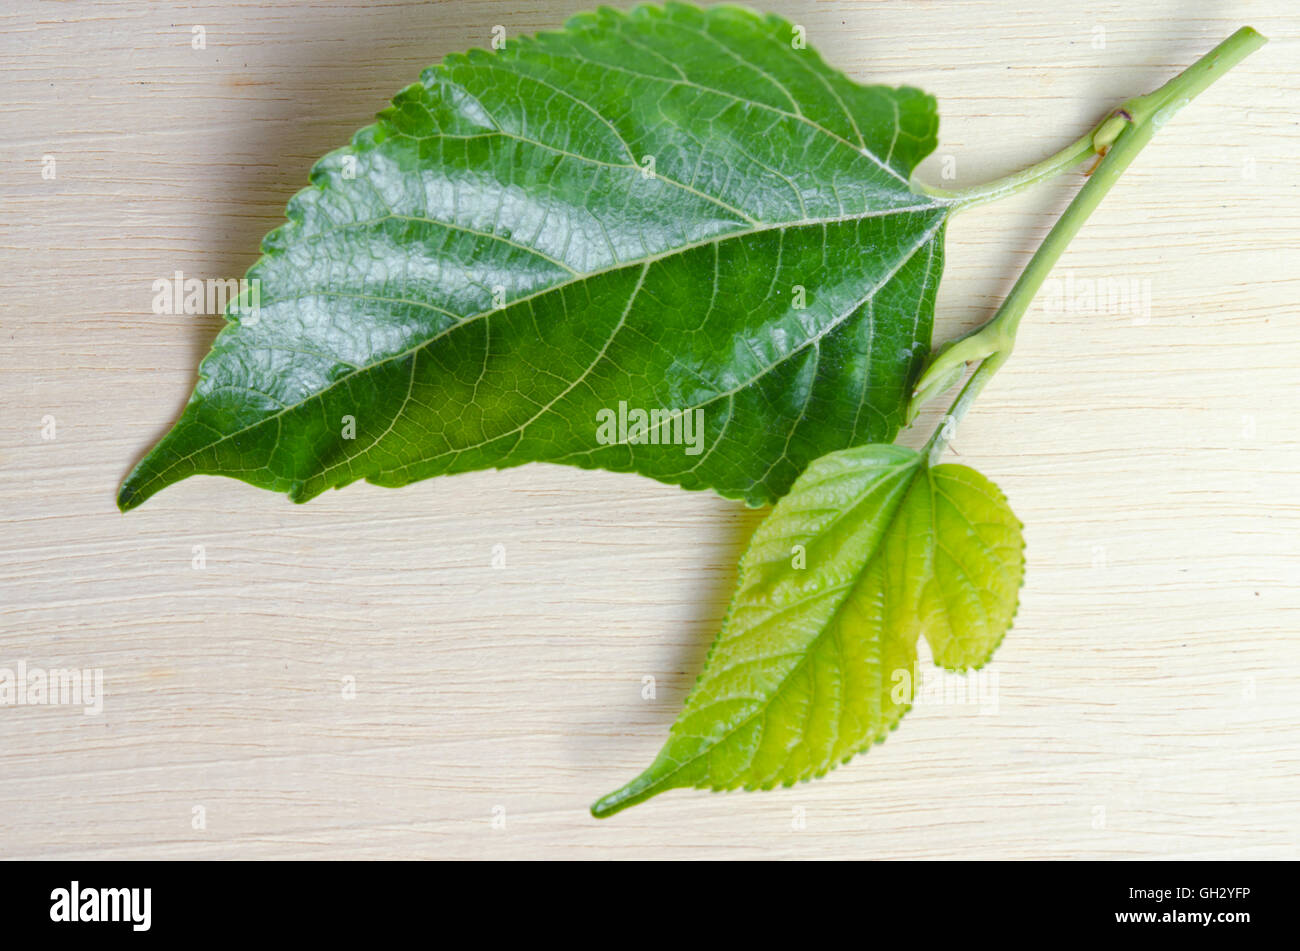 Mulberry (Other names are MORUS ALBA, Moraceae, black mulberry, Chinese mulberry, Morus cathayana) leaf isolated on wood backgro Stock Photo